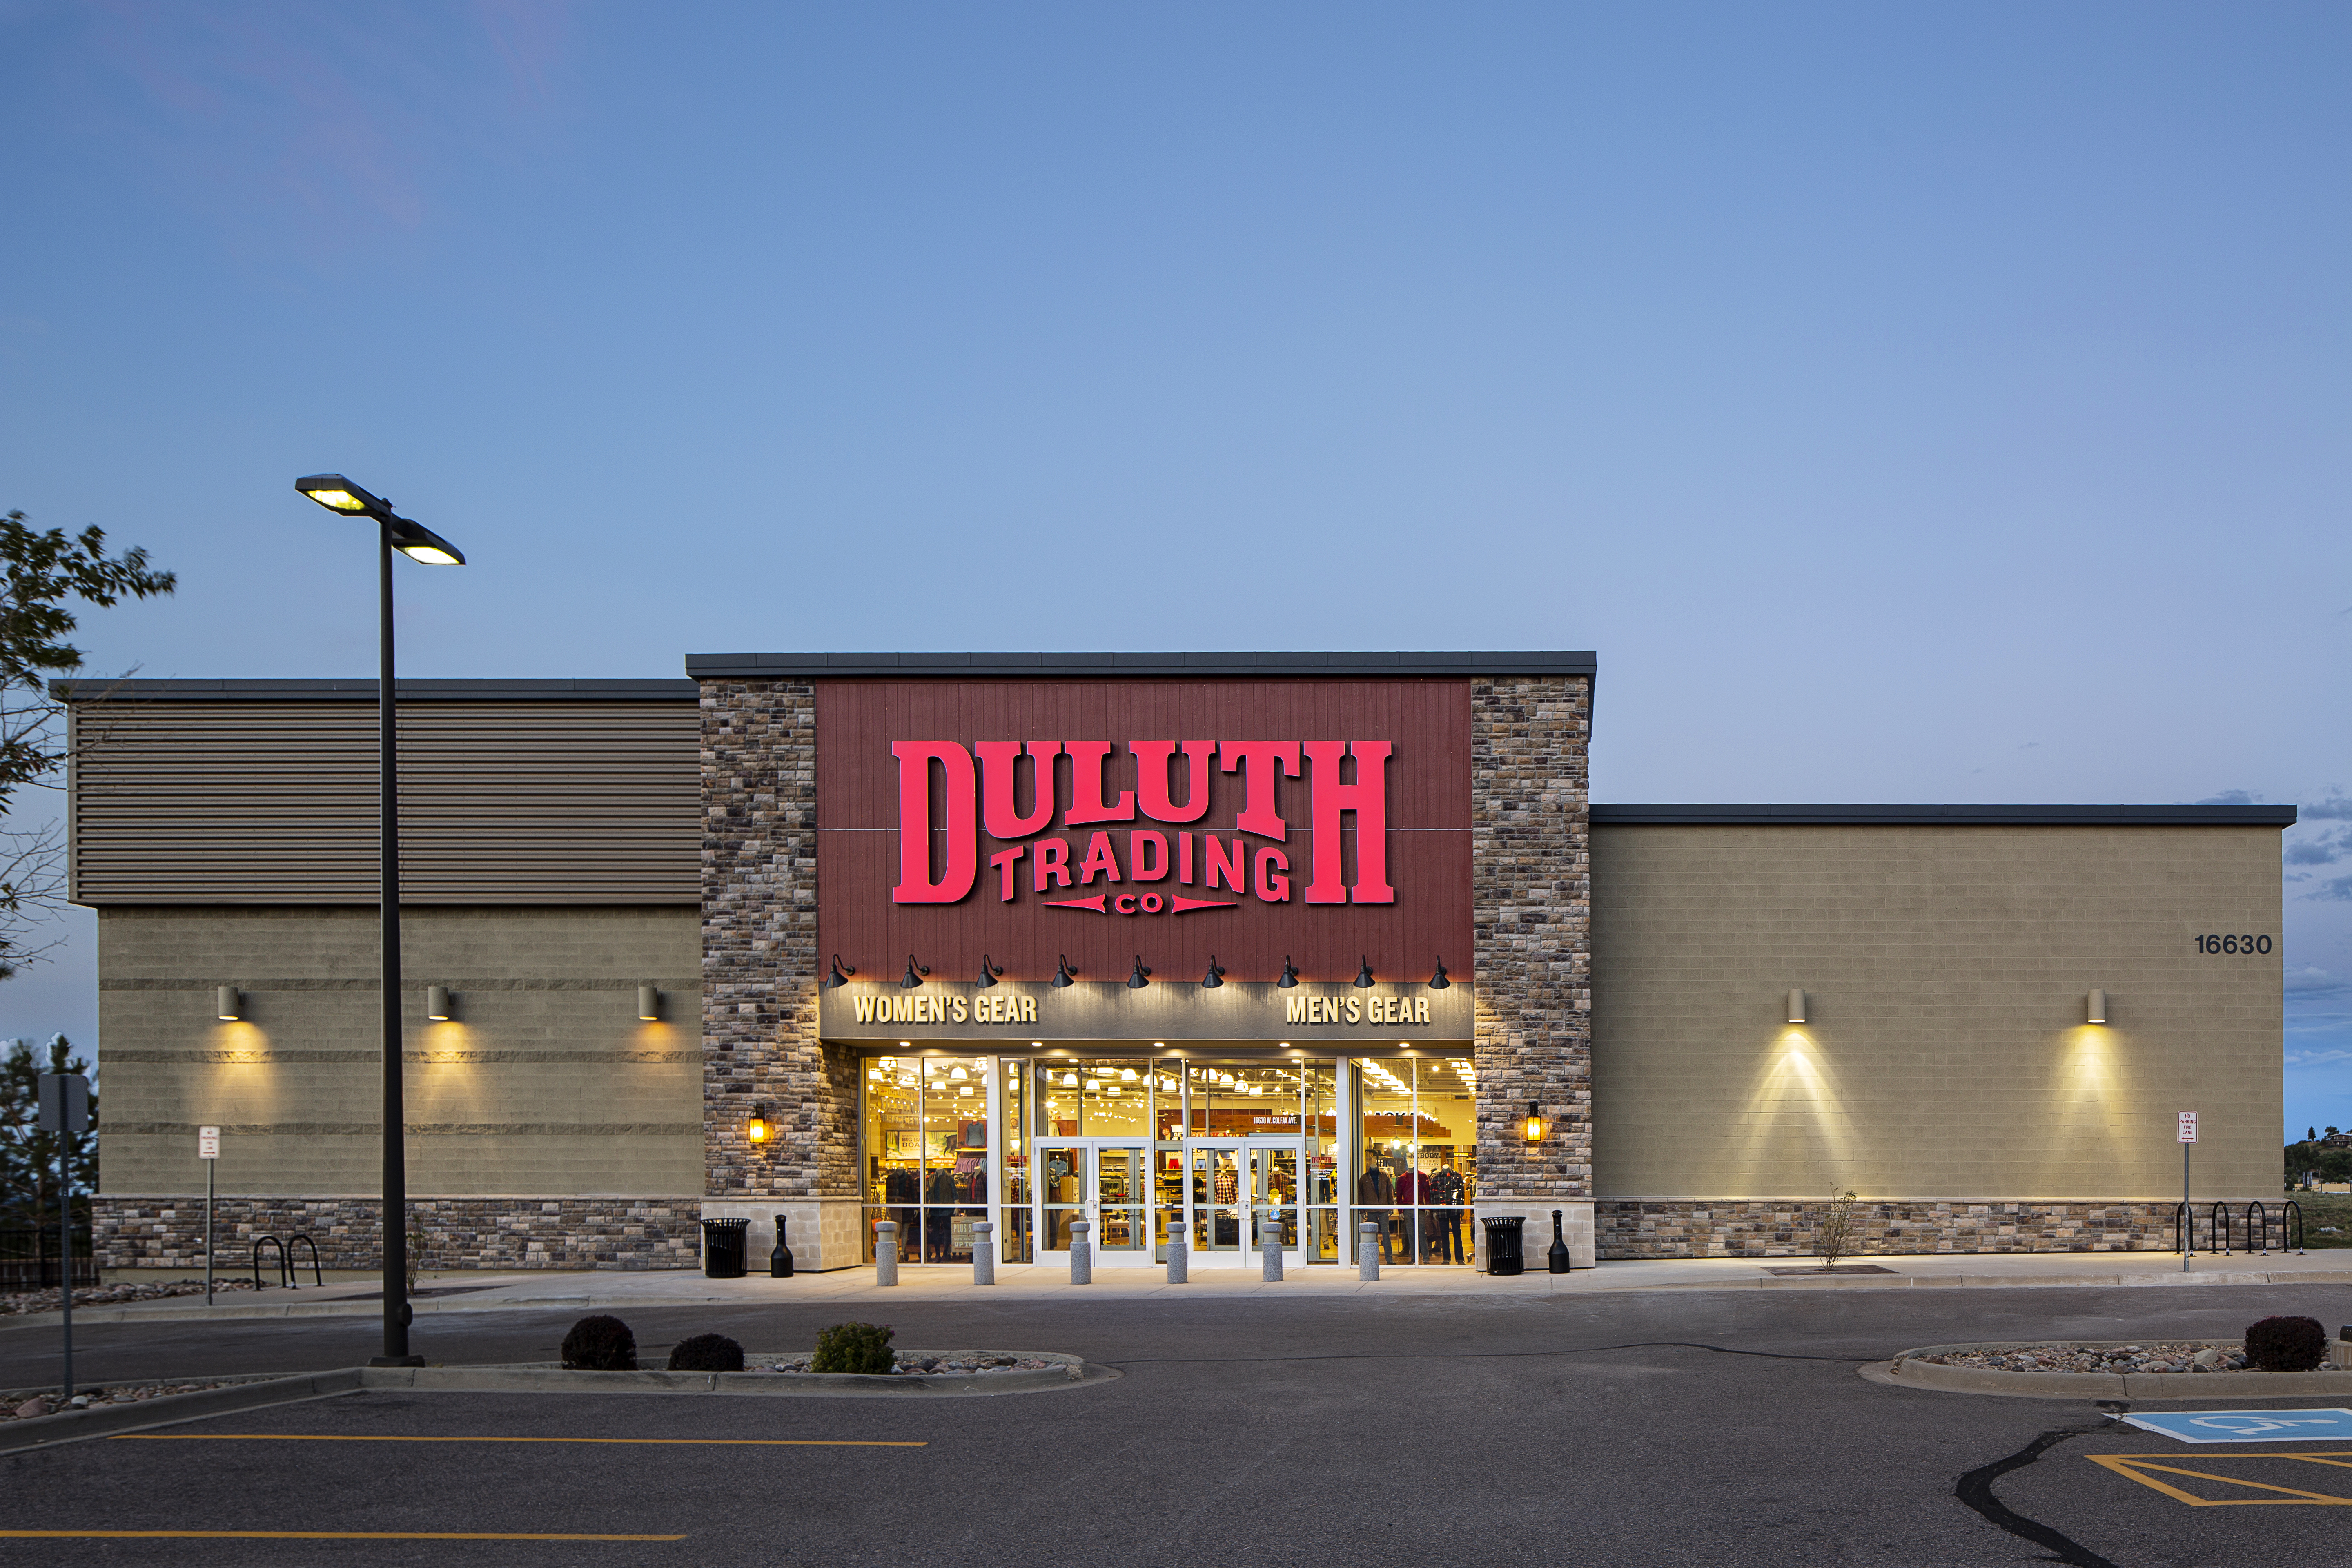 12 Days Of Deals - DAY 2! - Duluth Trading Company